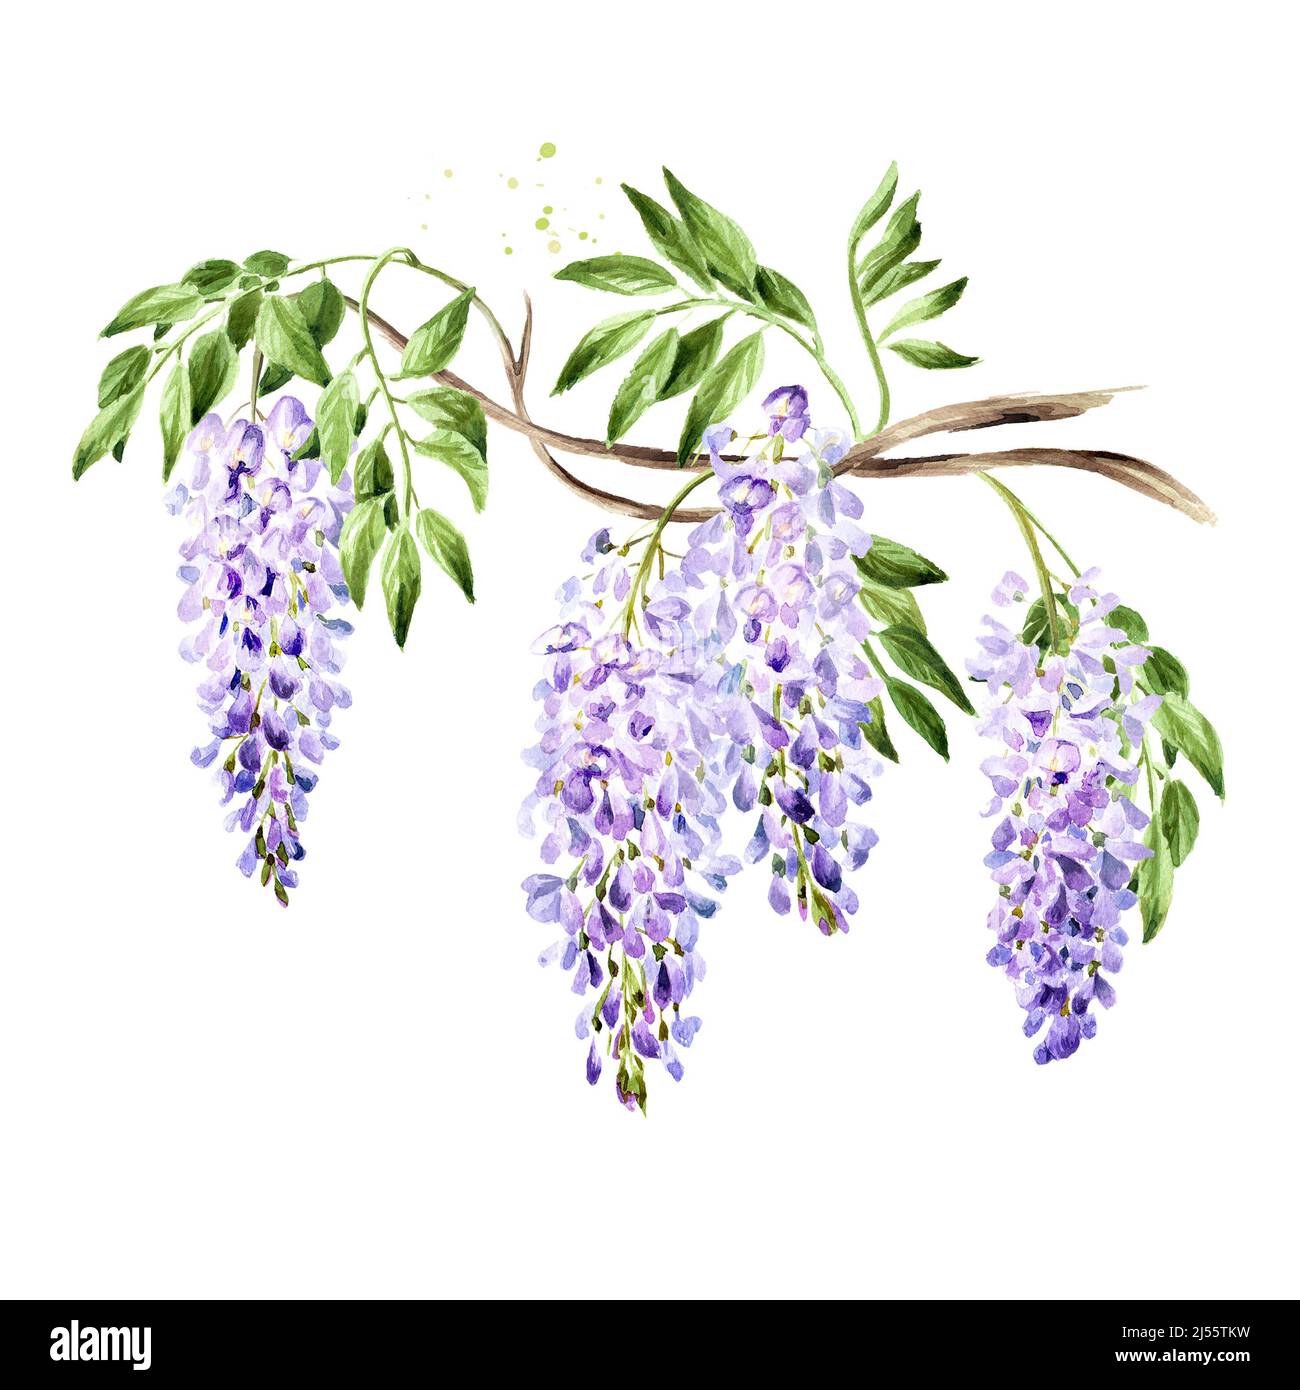 Wisteria flower  blossom branch. Hand drawn watercolor  illustration isolated on white background Stock Photo